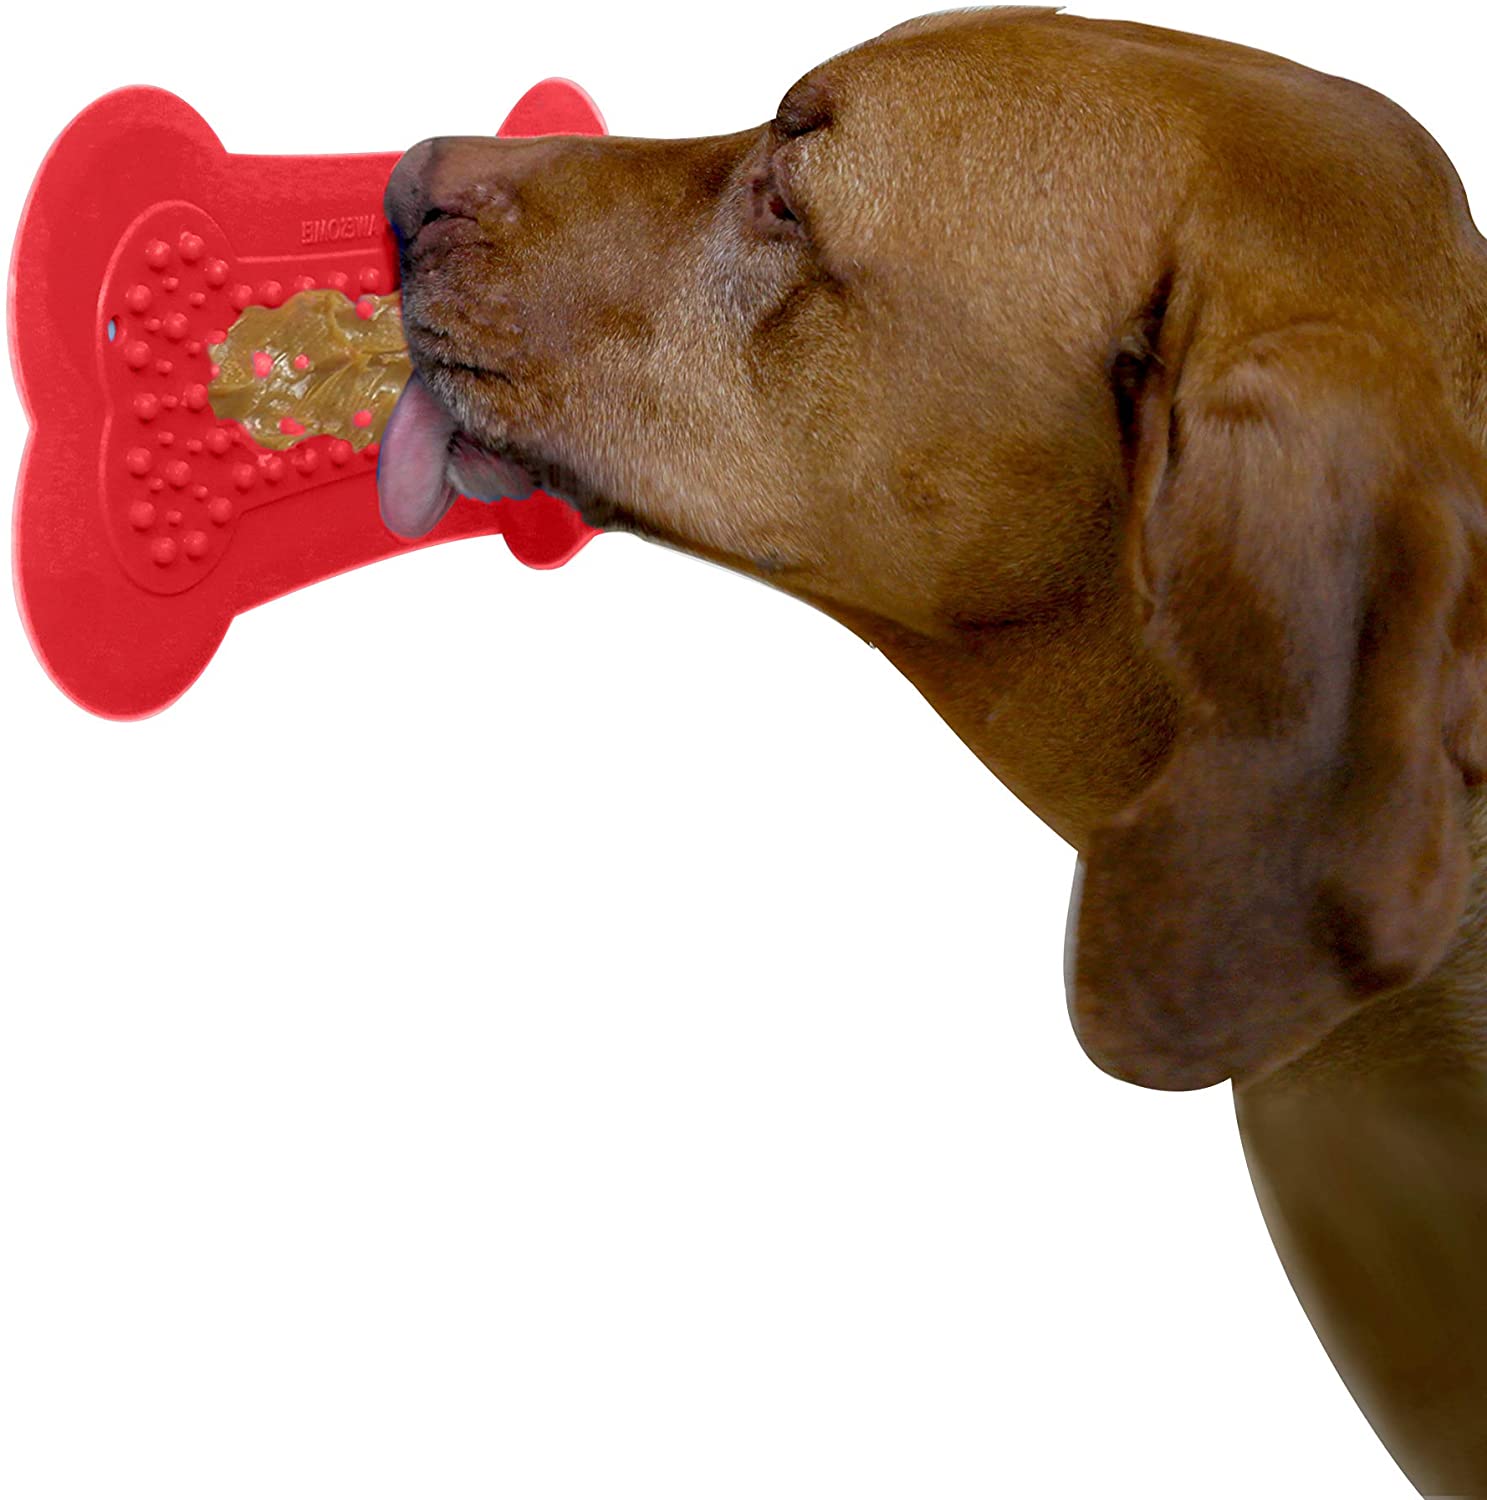 Active Chewers Puzzle Treat and Chew Toys! – The Health Whisperer